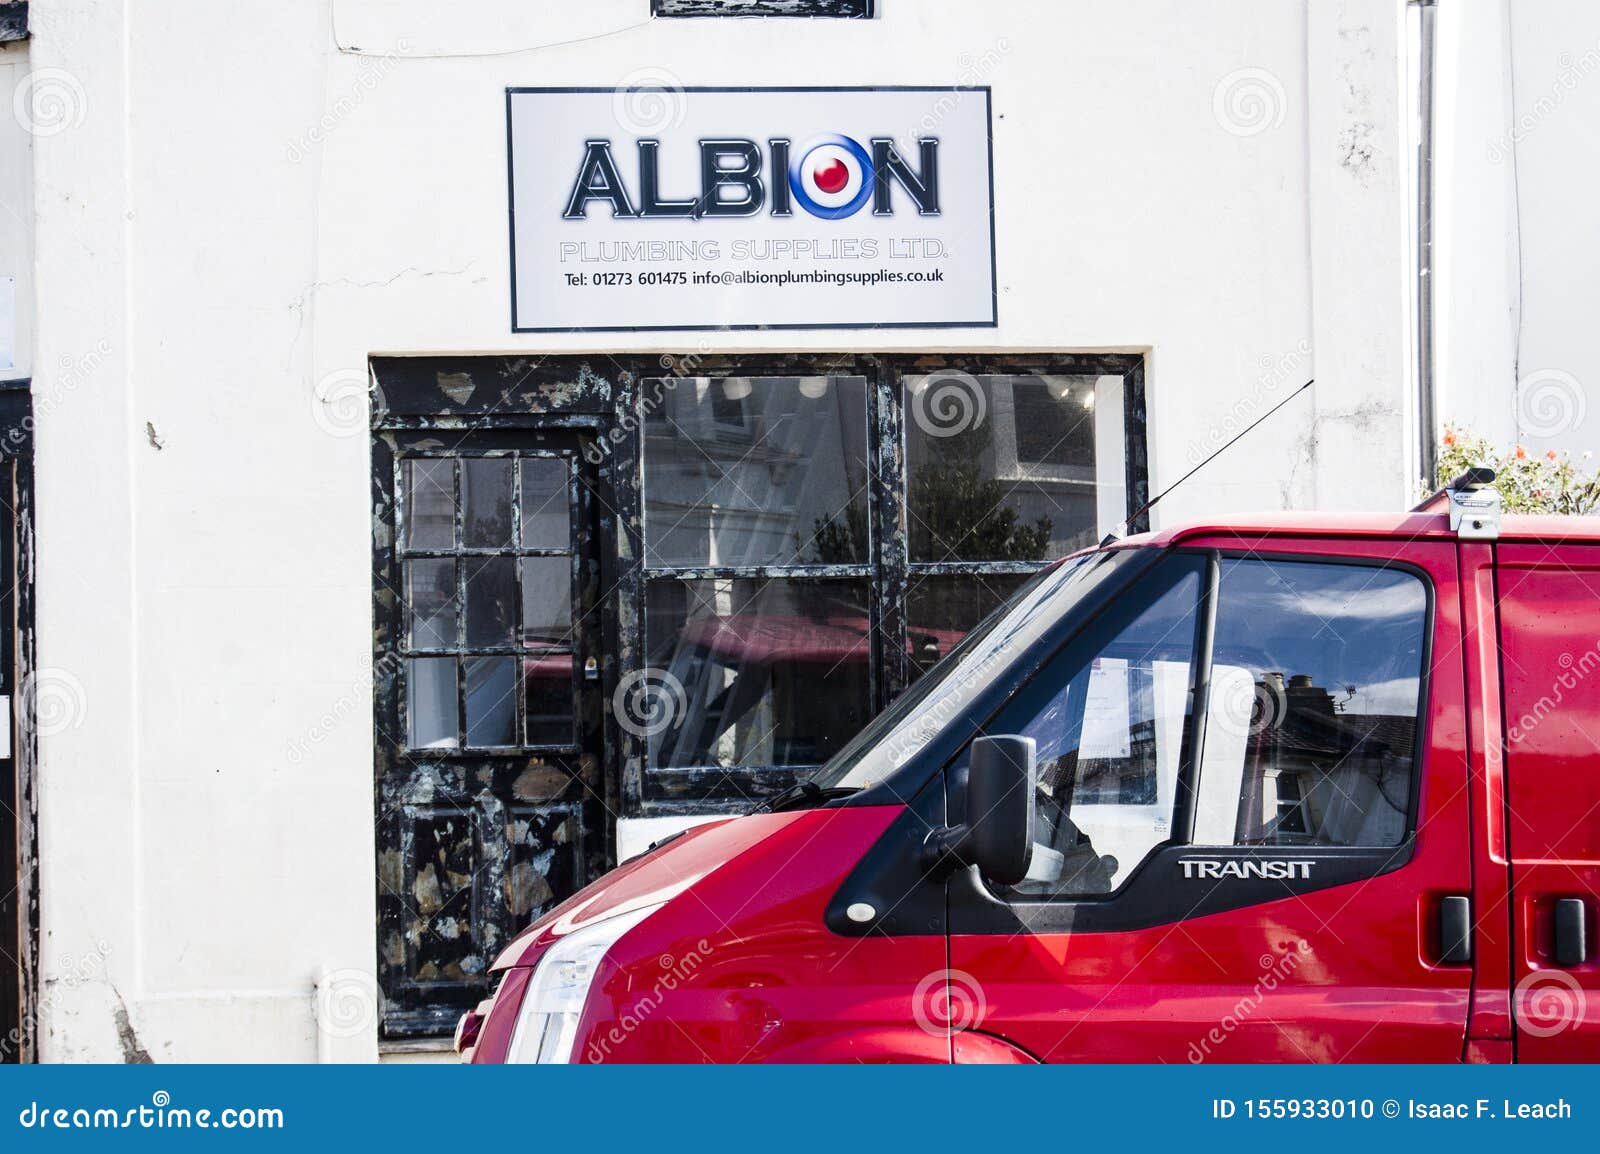 Albion A Local Plumbers Merchant Editorial Image Image of plumbers